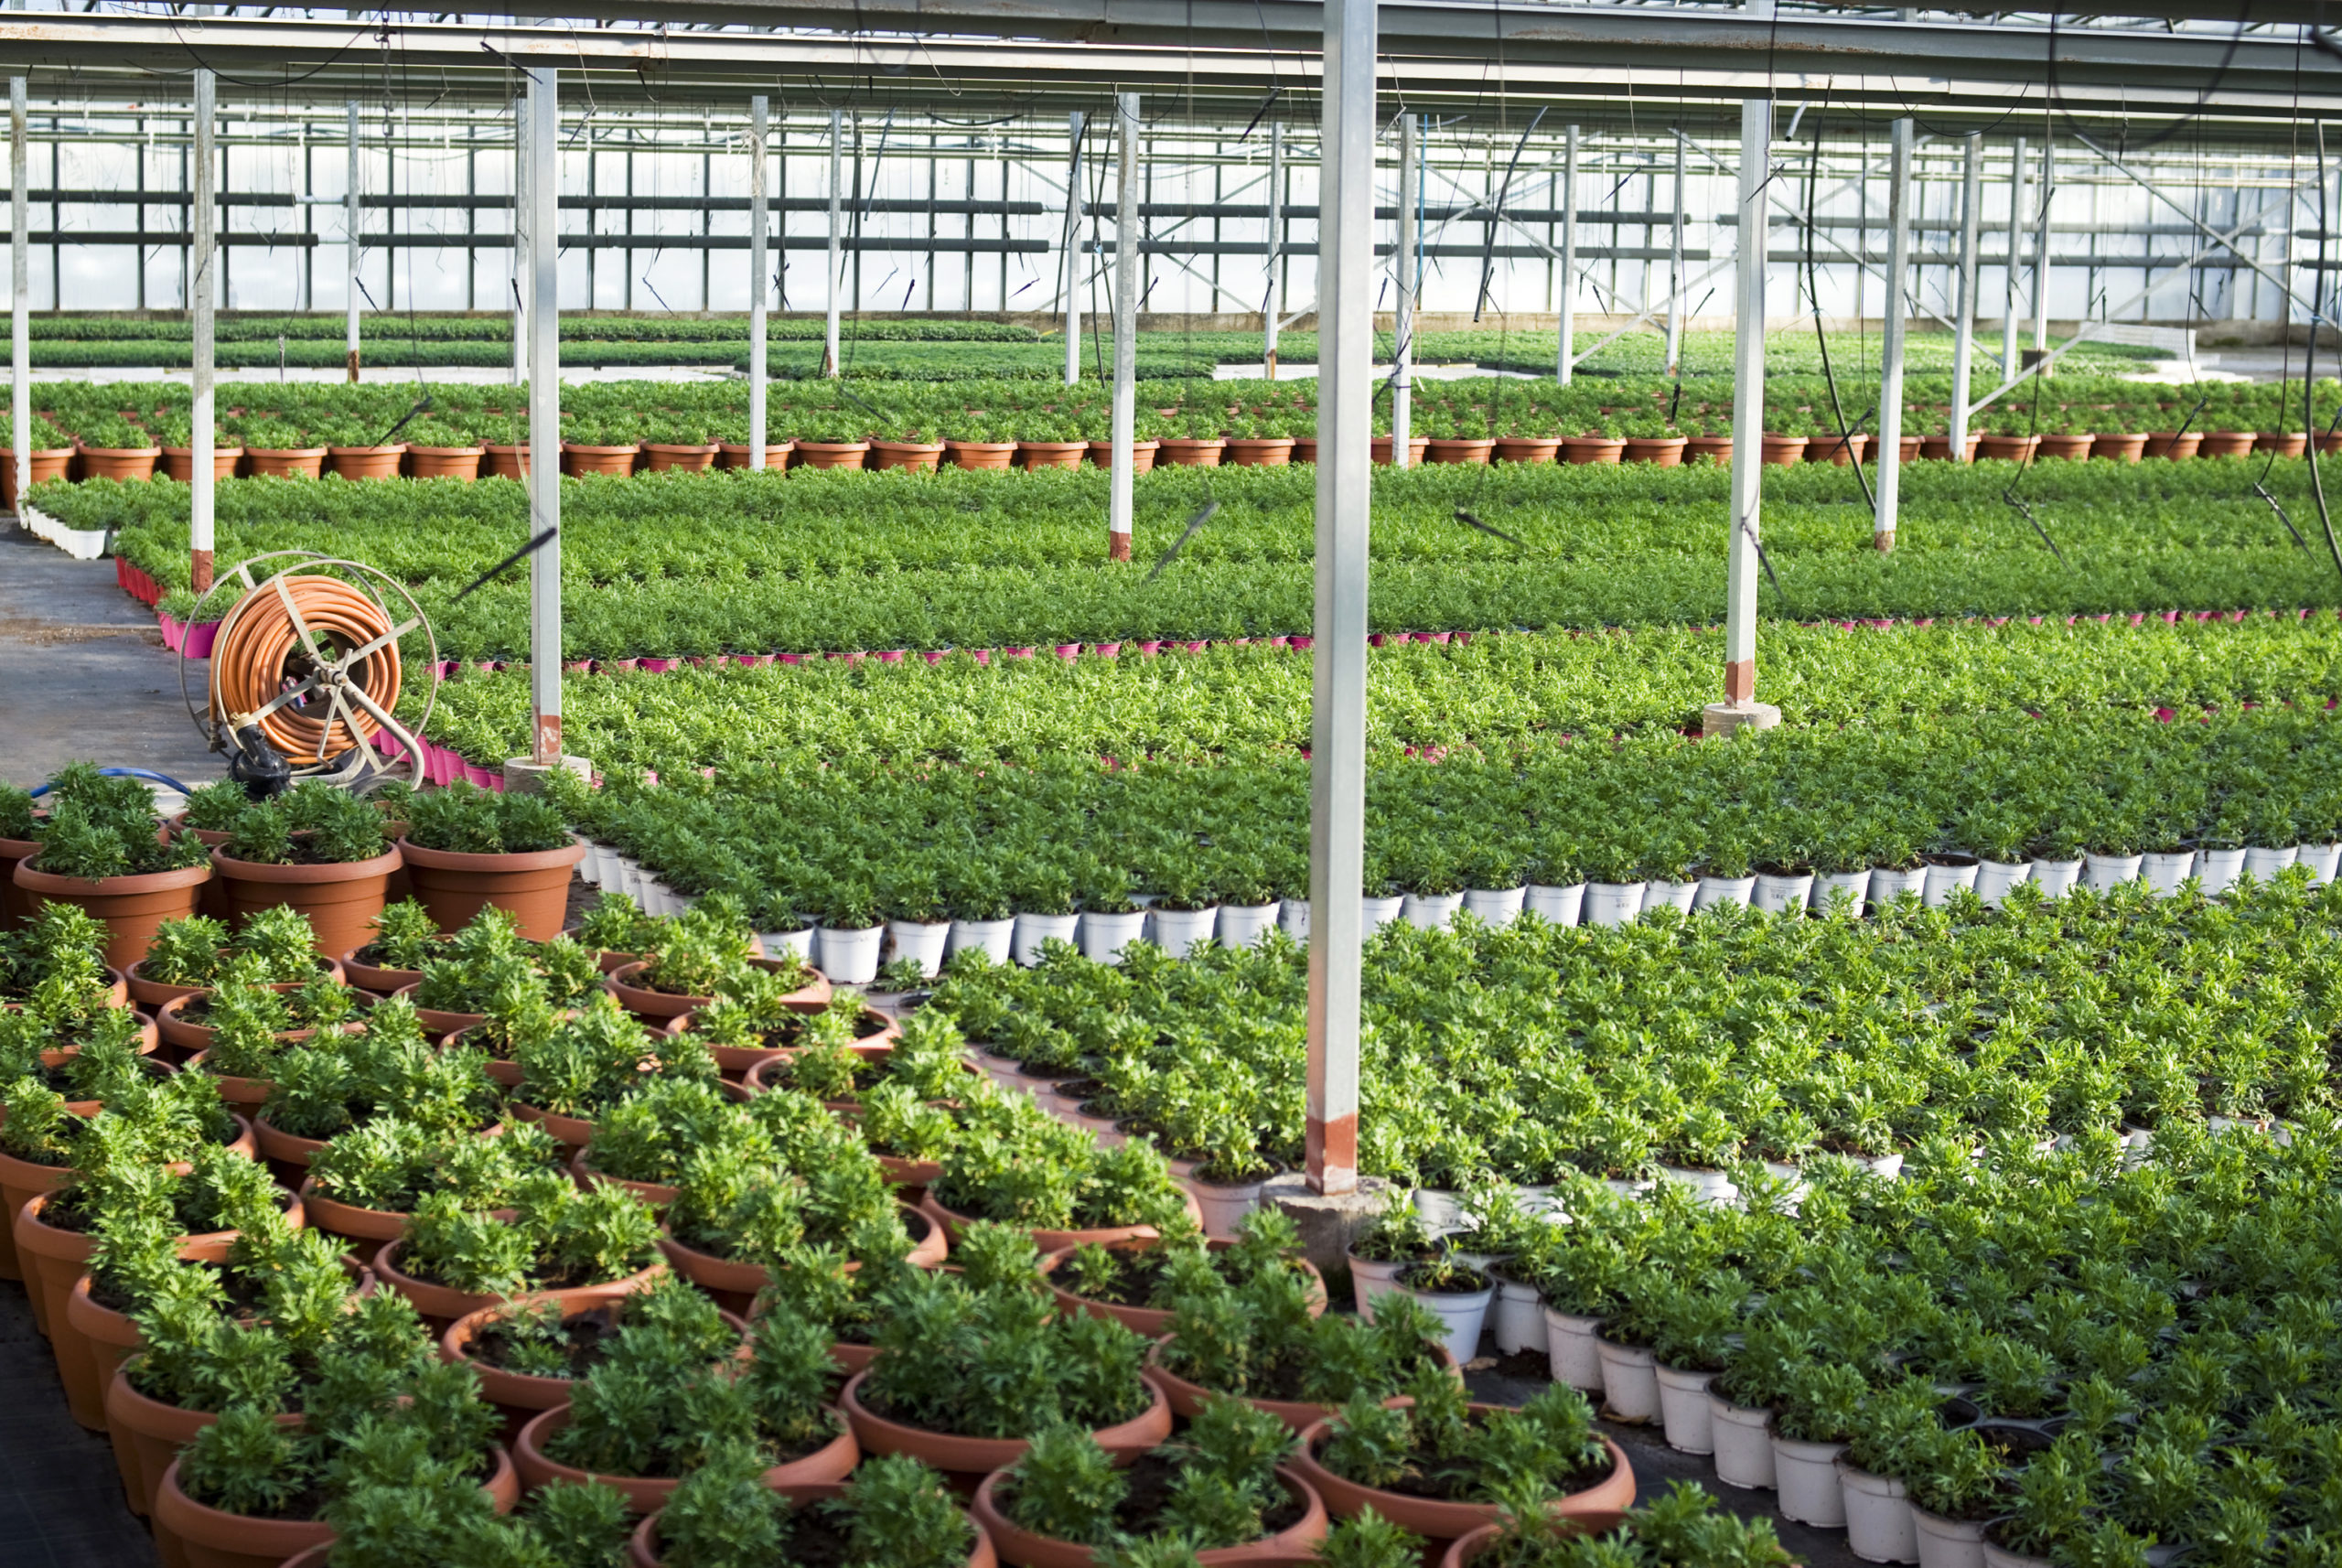 The,Young,Plants,Growing,In,A,Greenhouse